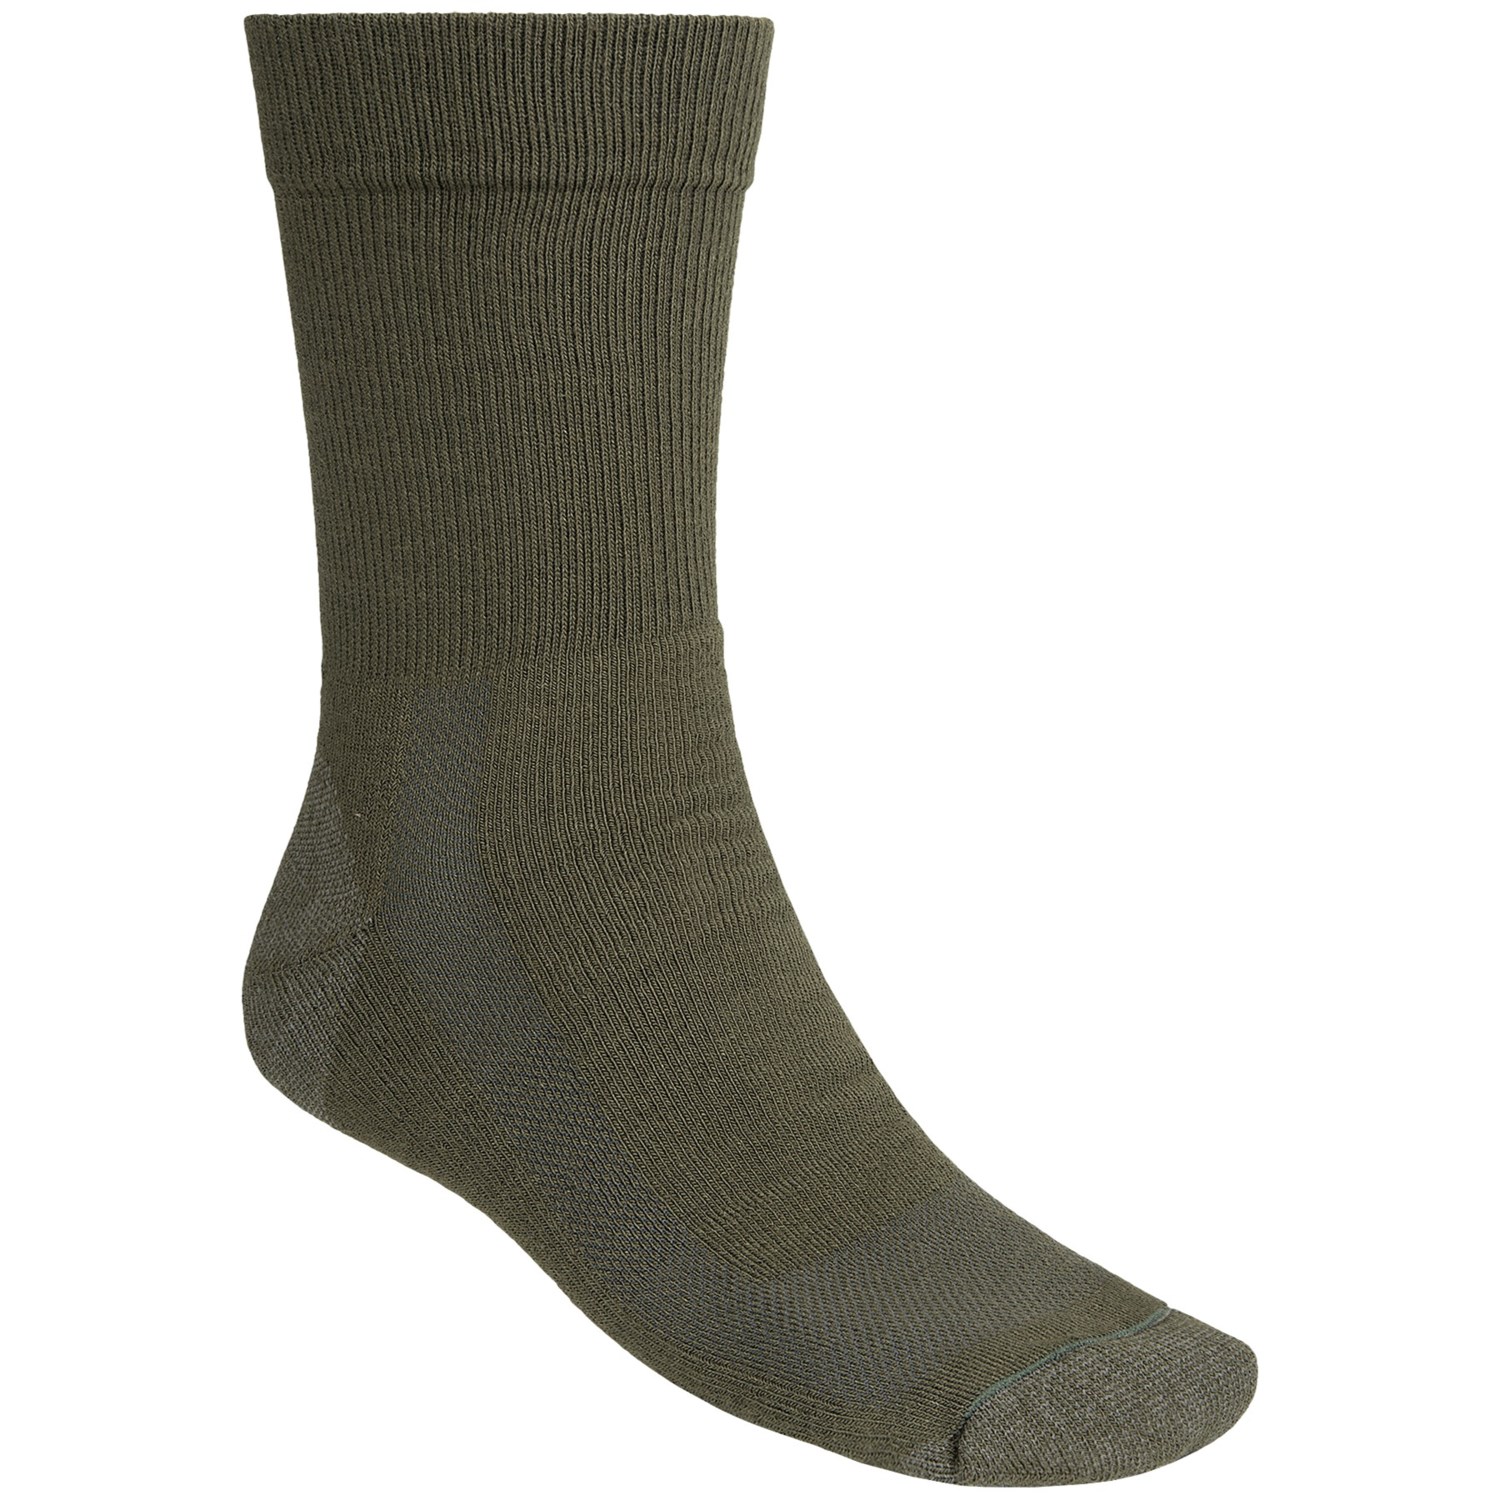 Fox River Outdoor Crew Socks For Men and Women  Save 38%